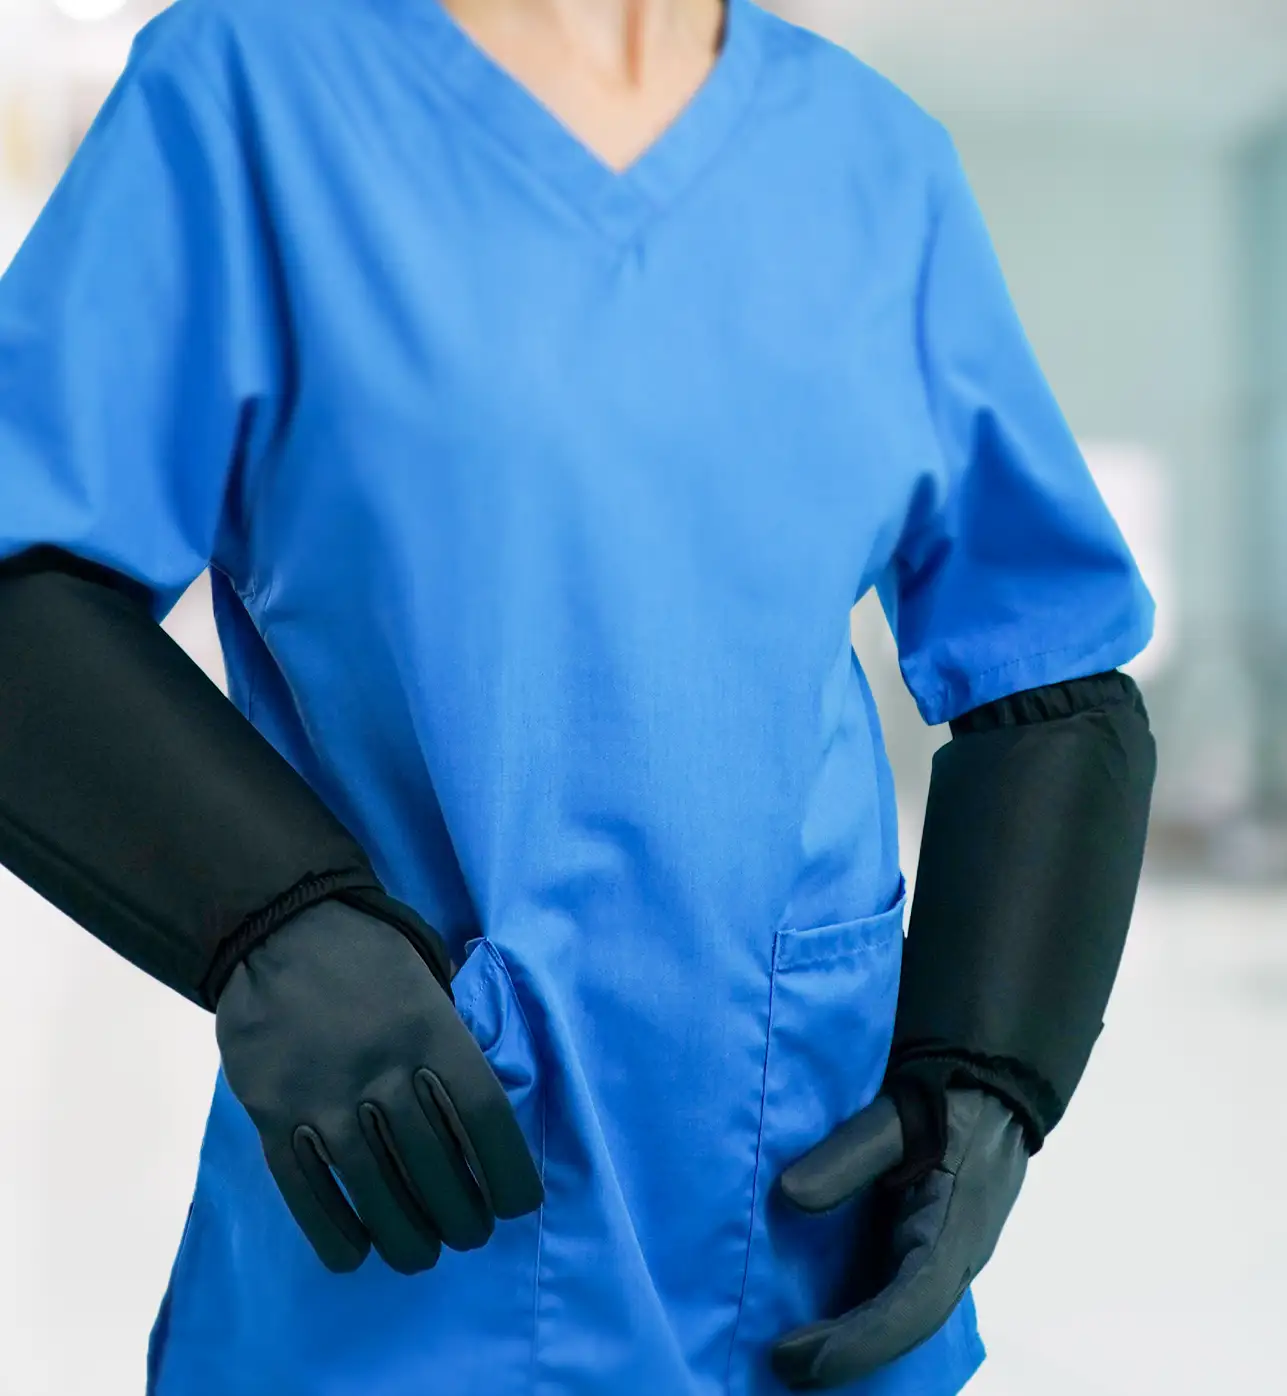 Healthcare professional wearing BitePRO Version 1 arm guards for bite protection